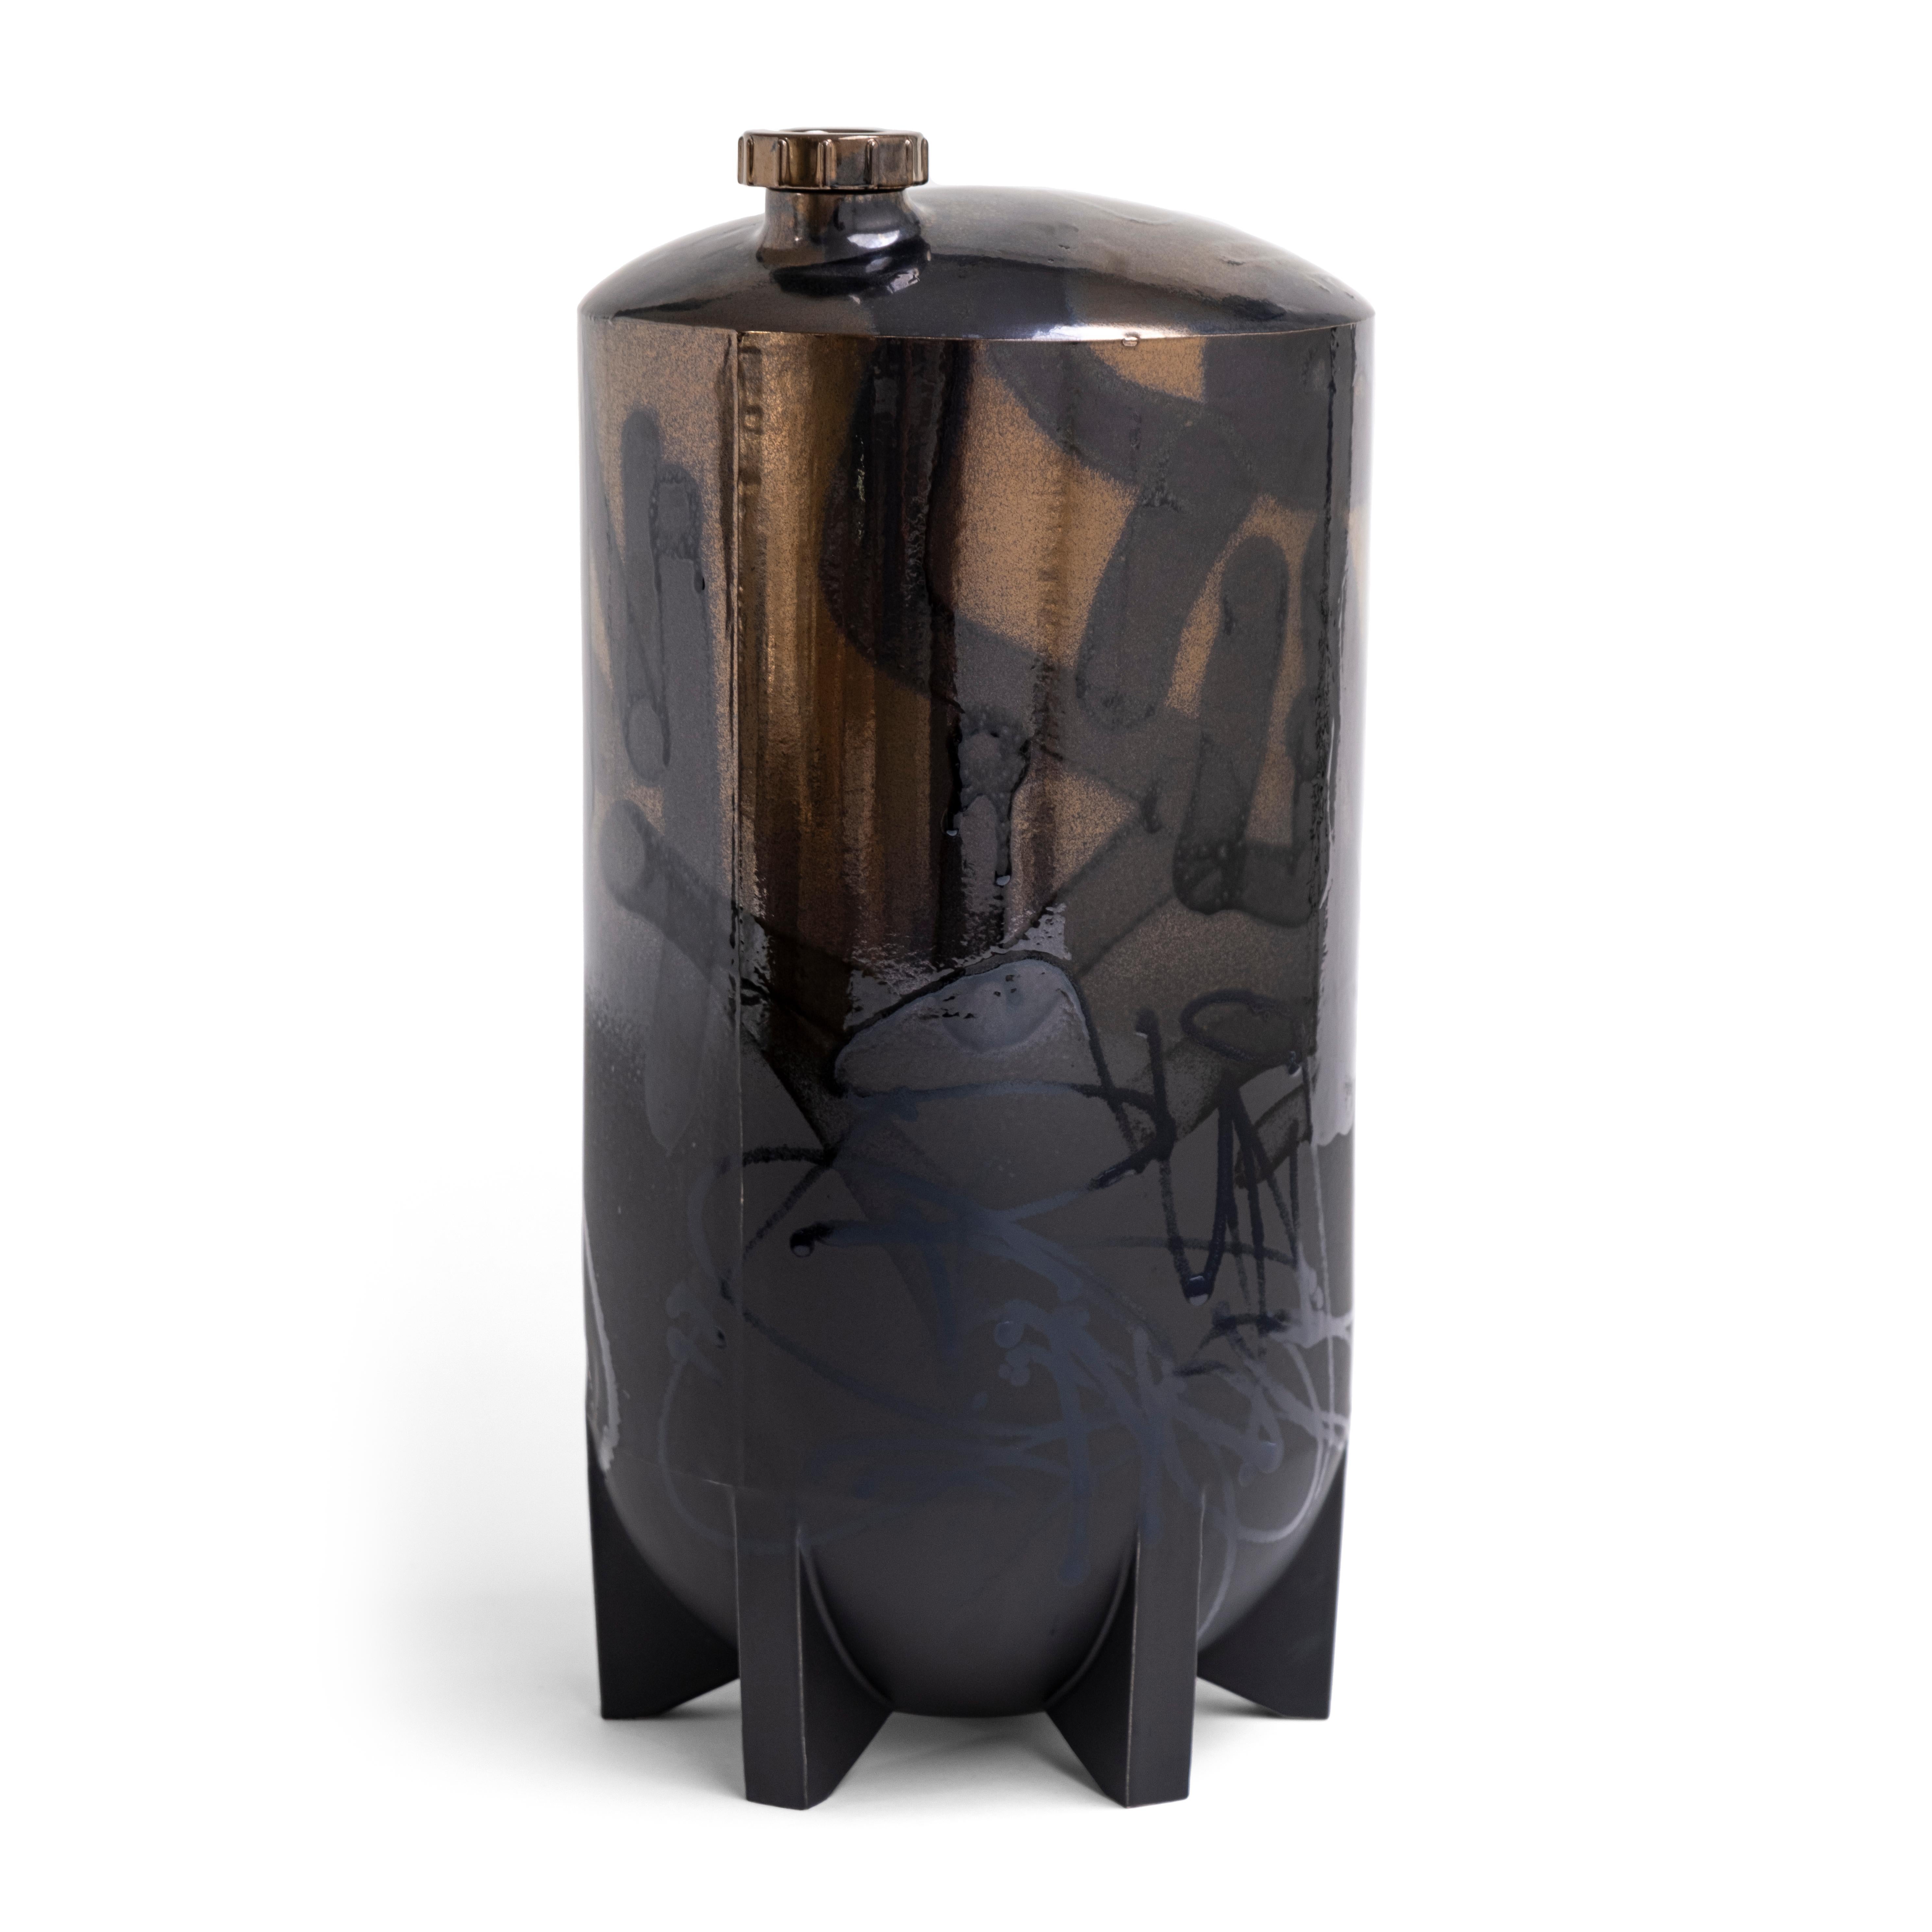 Under pressure 8 by Yuri van Poppel
Dimensions: D 27 x H 55 cm
One of a kind.
Earthenware, layered ceramic glazes, various colours.
Handmade and spray-painted by hand by SunkOne. Removable lid.

Everlasting graffiti spray-painted with ceramic